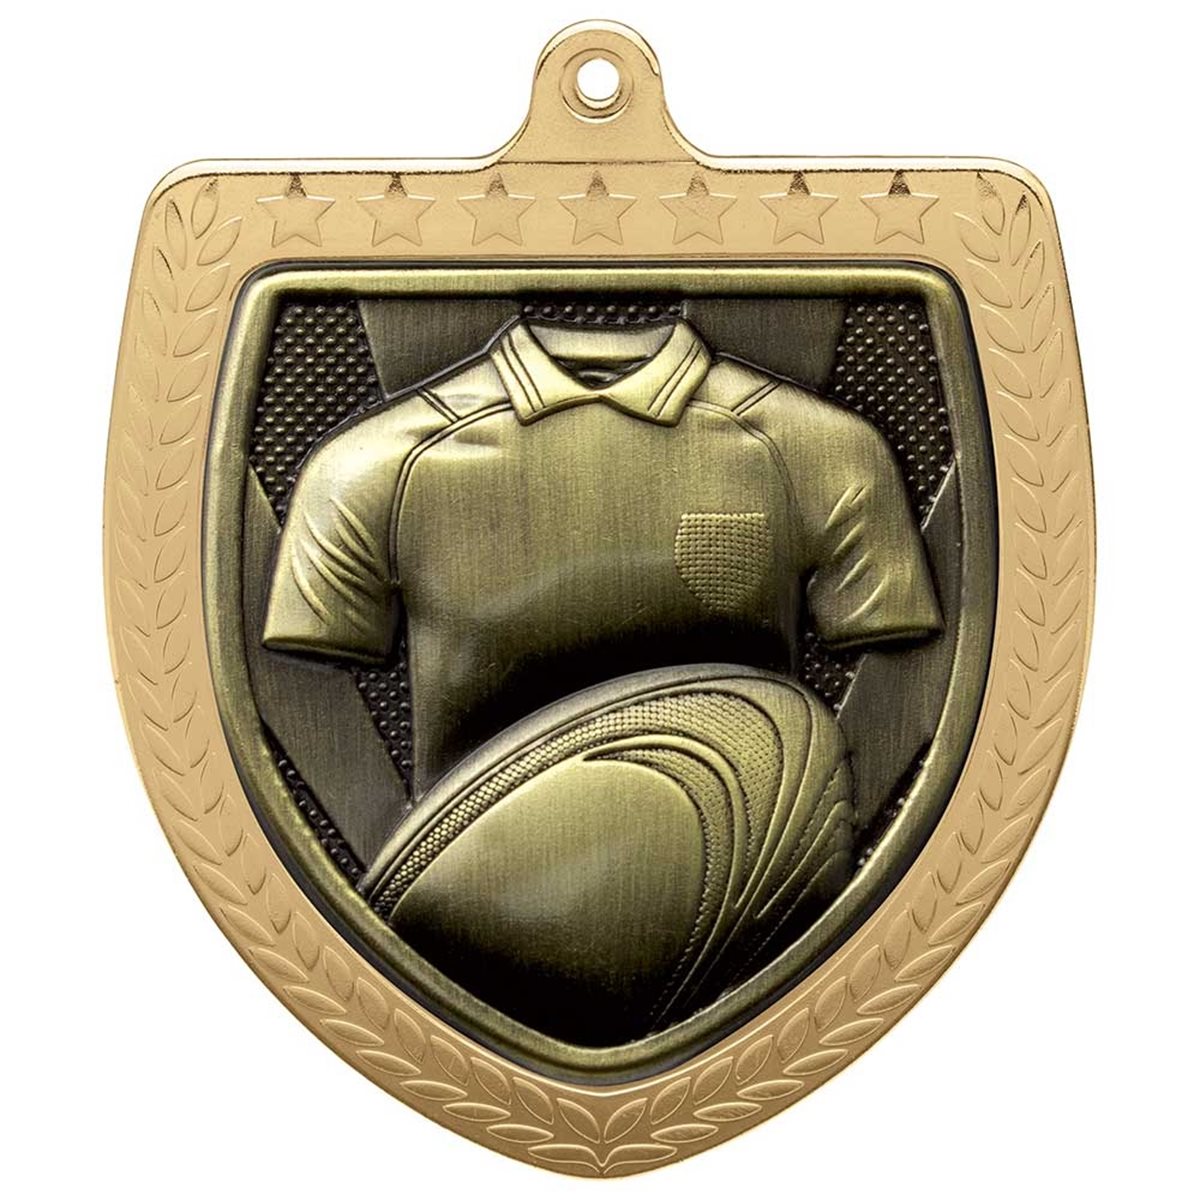 Rugby 75mm Cobra Shield Medal in Gold, Silver & Bronze MM24207